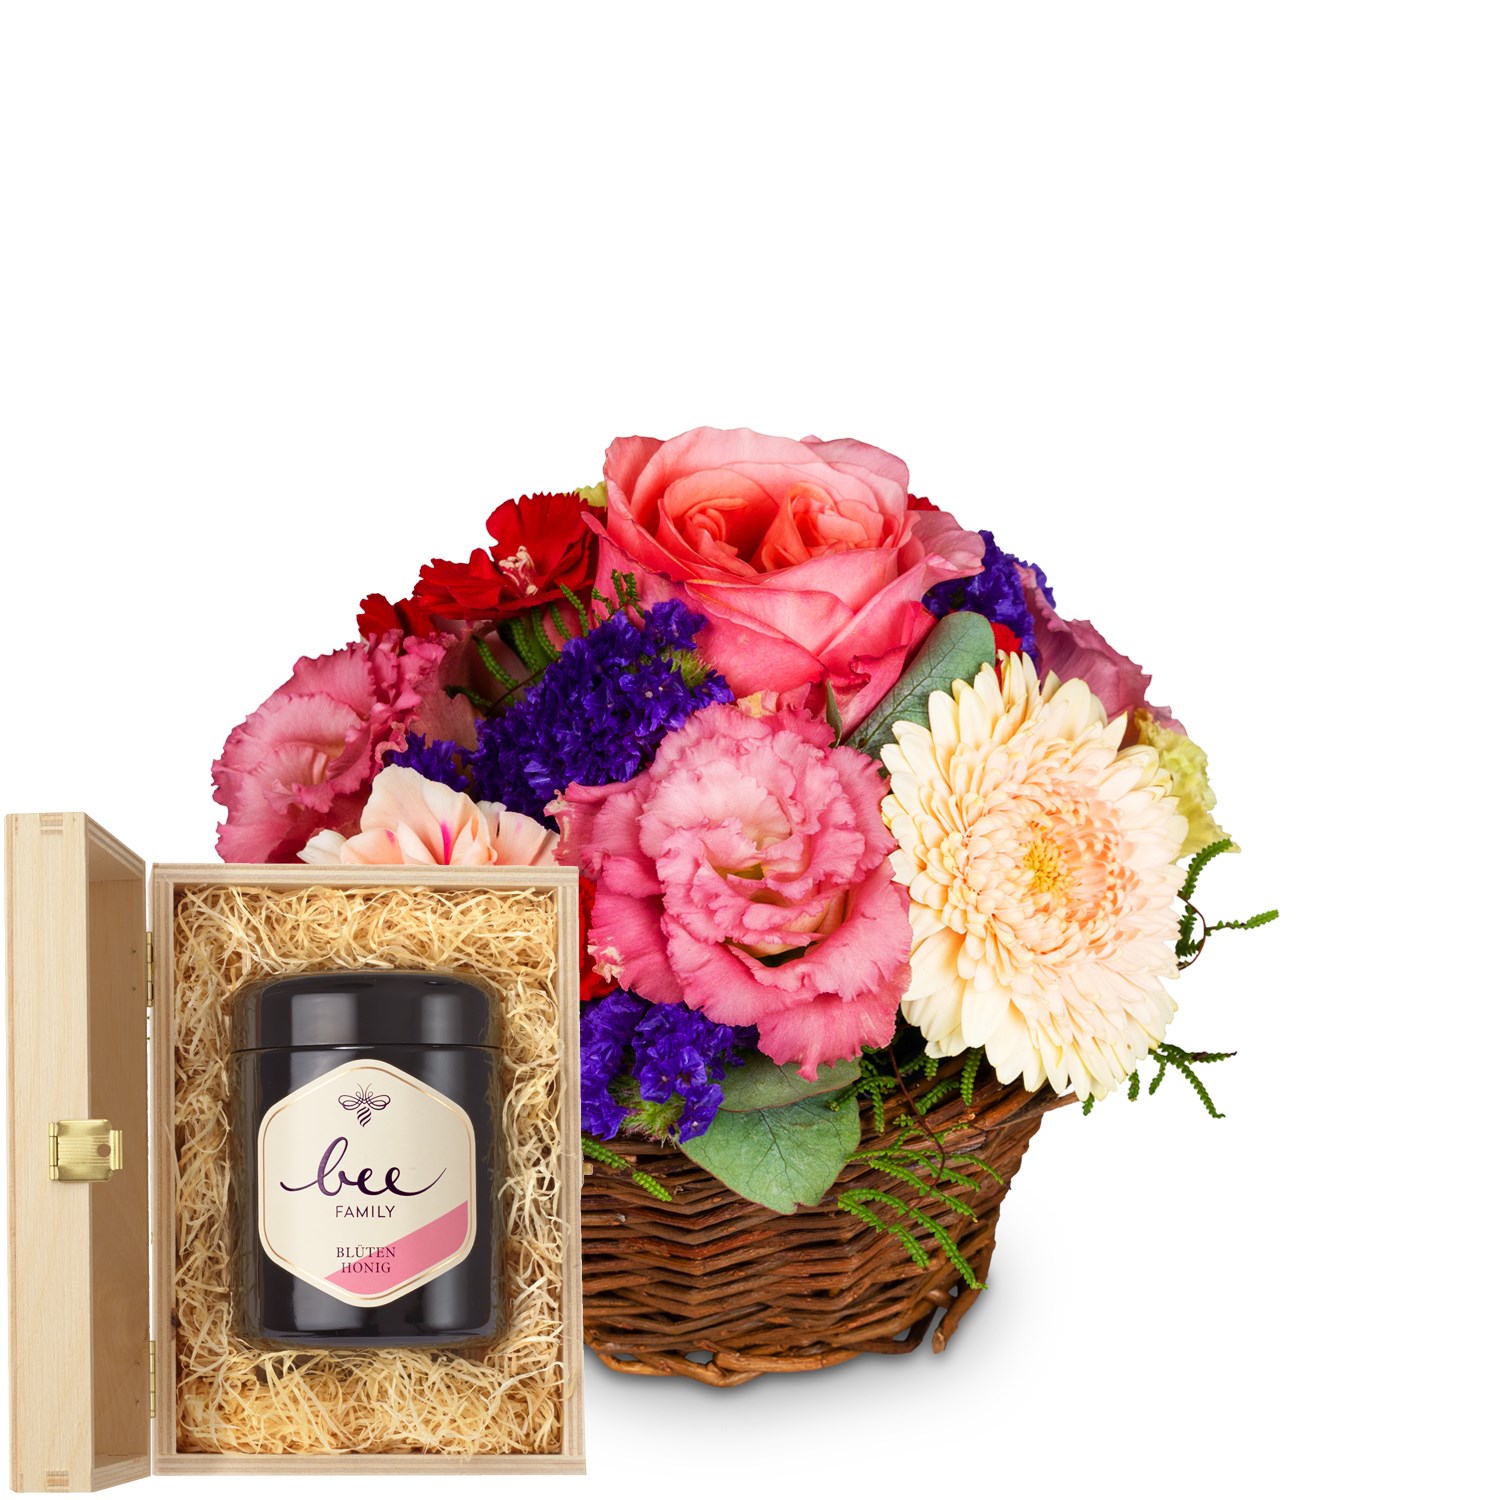 product image for Melody of Color with Bee-Family Swiss blossom honey